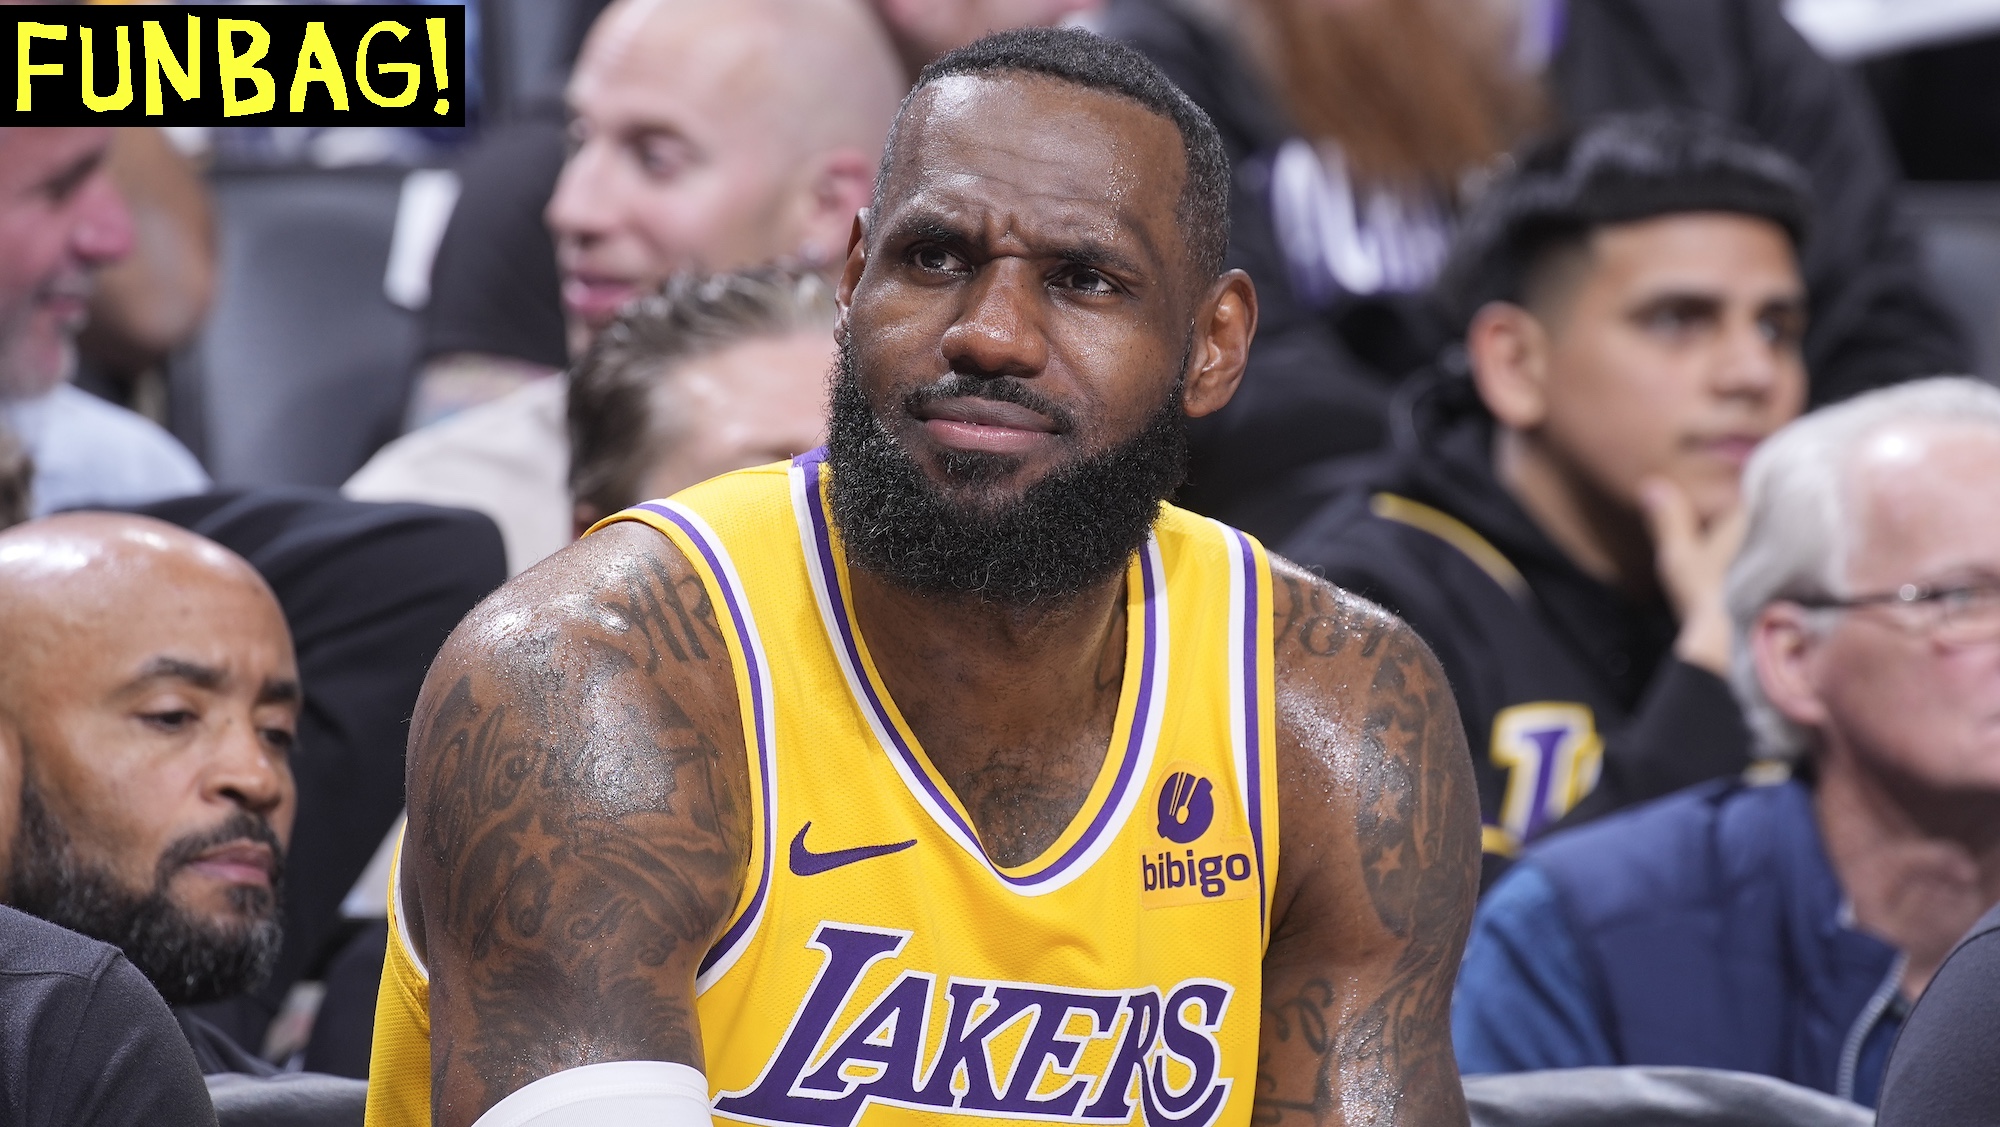 SACRAMENTO, CA - MARCH 13: LeBron James #23 of the Los Angeles Lakers looks on from the bench during the game against the Sacramento Kings on March 13, 2024 at Golden 1 Center in Sacramento, California. NOTE TO USER: User expressly acknowledges and agrees that, by downloading and or using this photograph, User is consenting to the terms and conditions of the Getty Images Agreement. Mandatory Copyright Notice: Copyright 2024 NBAE (Photo by Rocky Widner/NBAE via Getty Images)